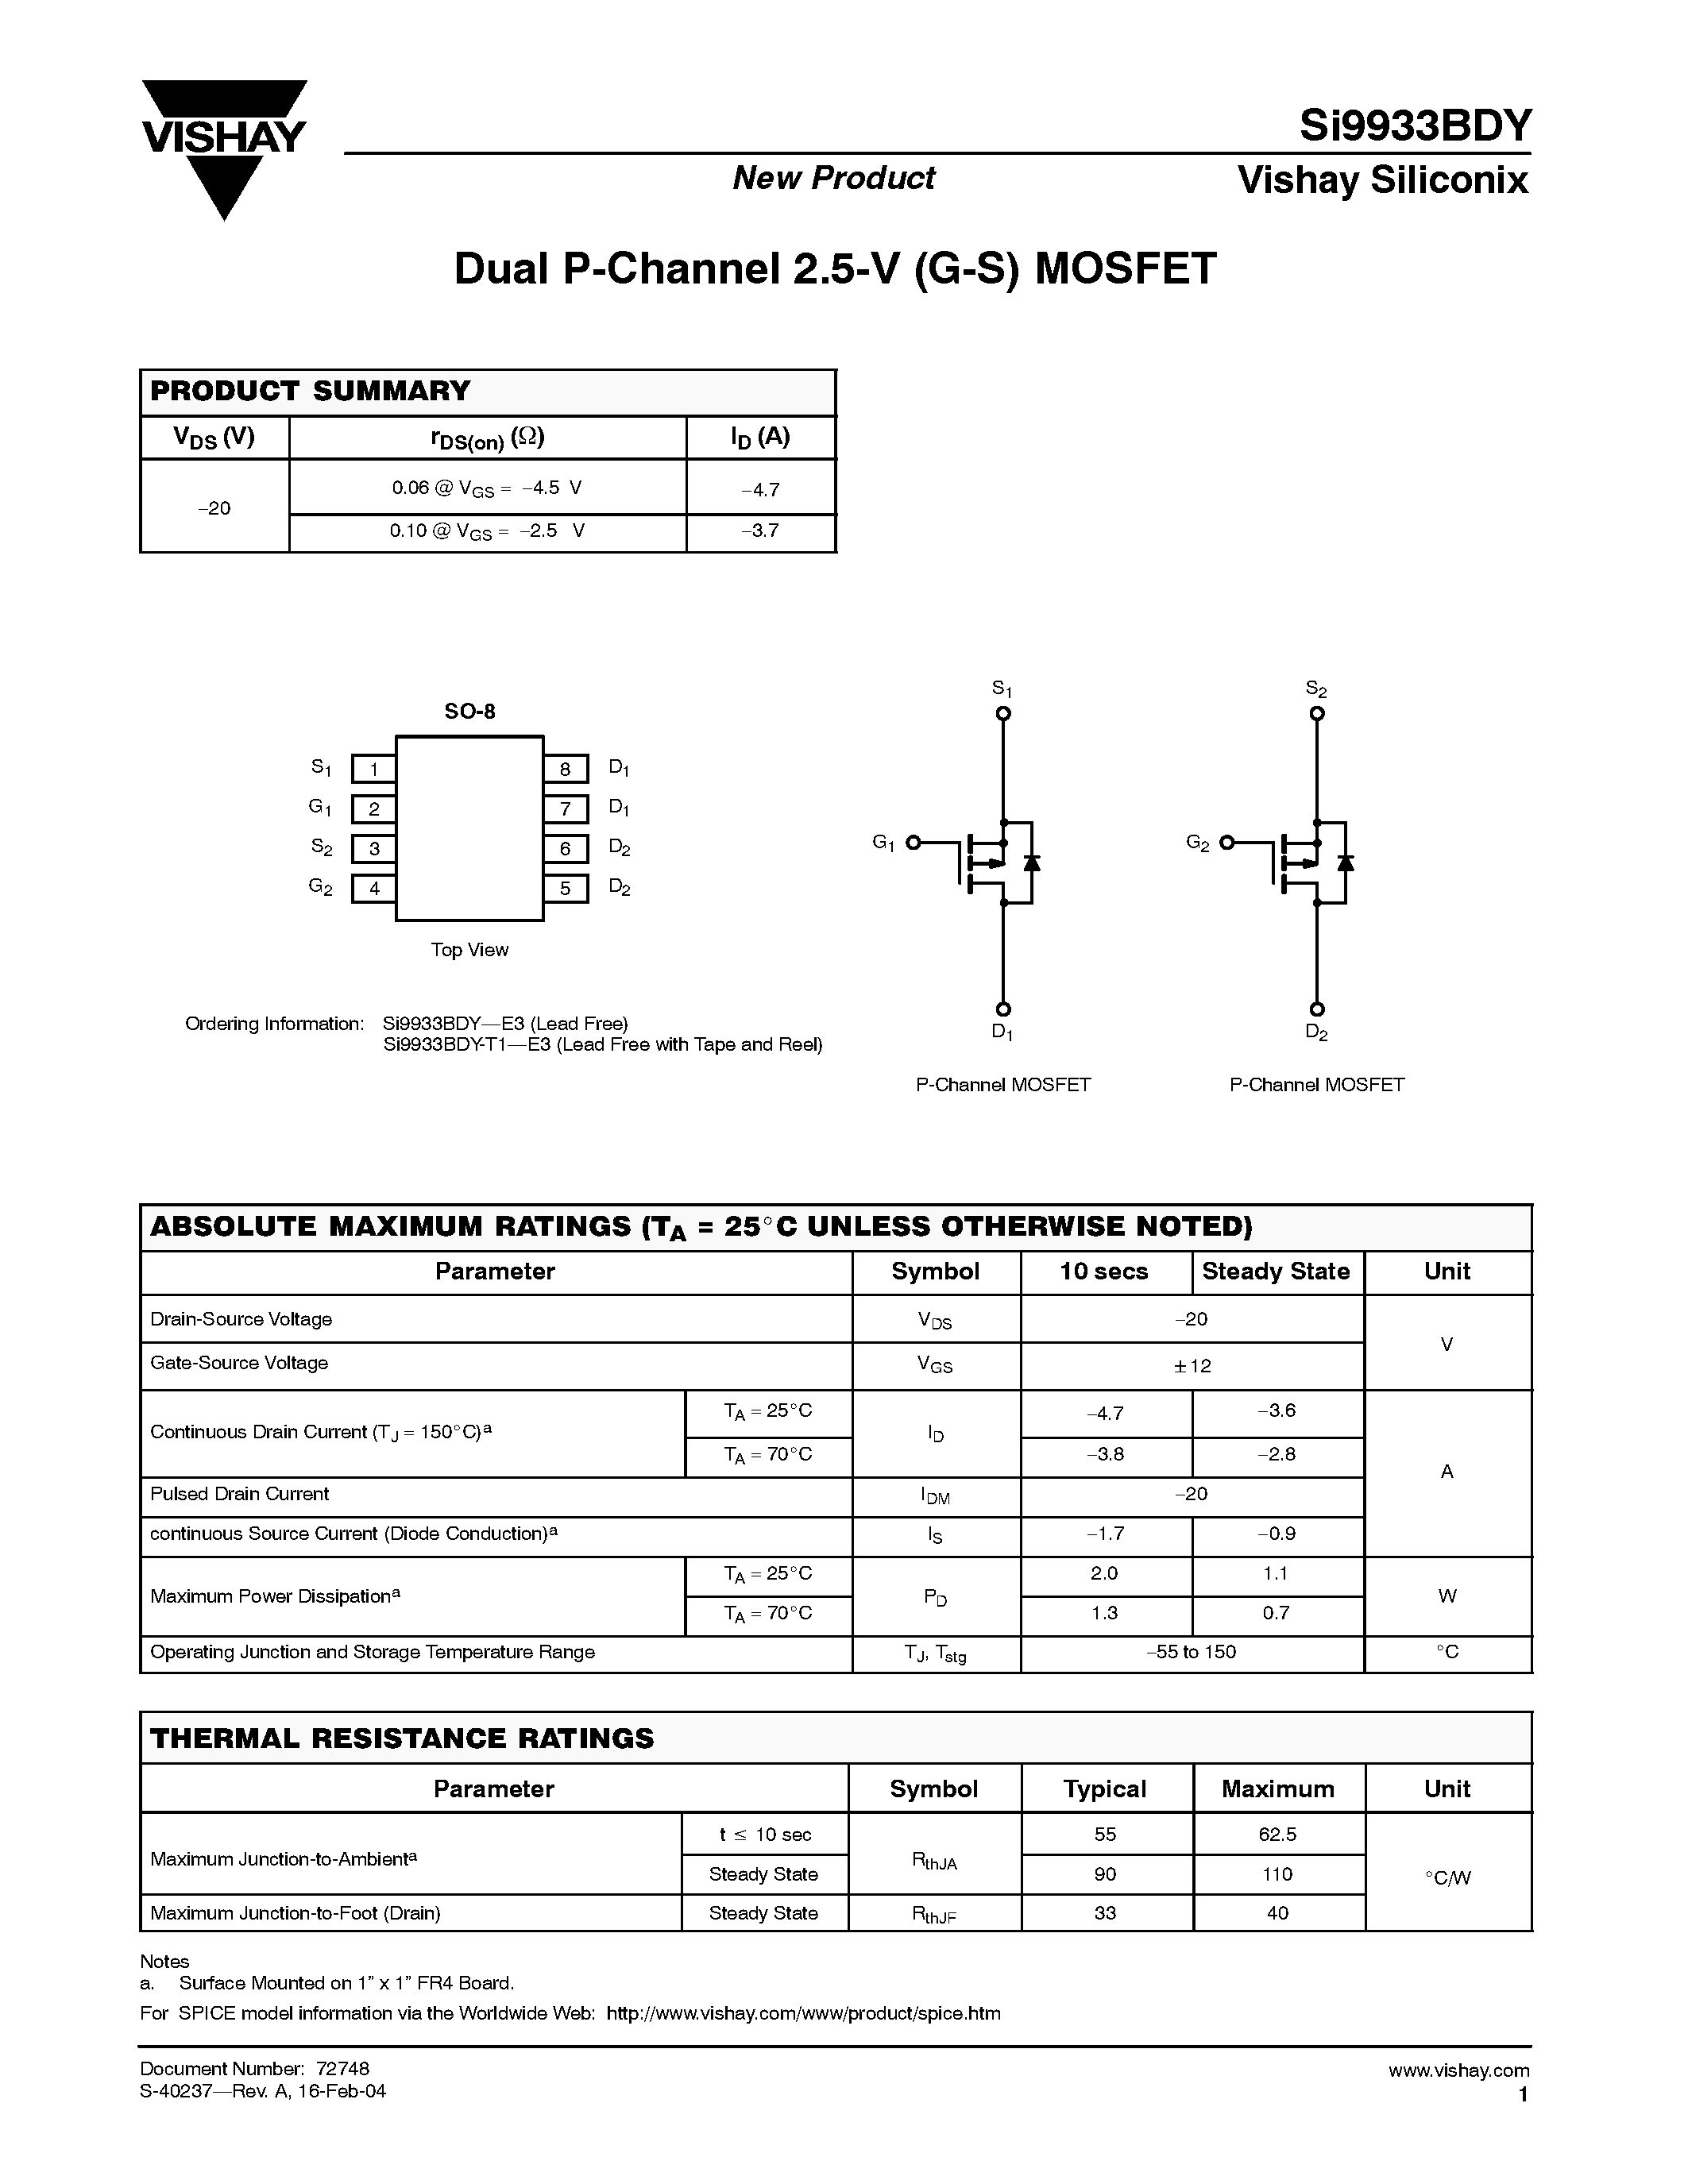 Datasheet SI9933BDY-T1-E3 - Dual P-Channel 2.5-V (G-S) MOSFET page 1